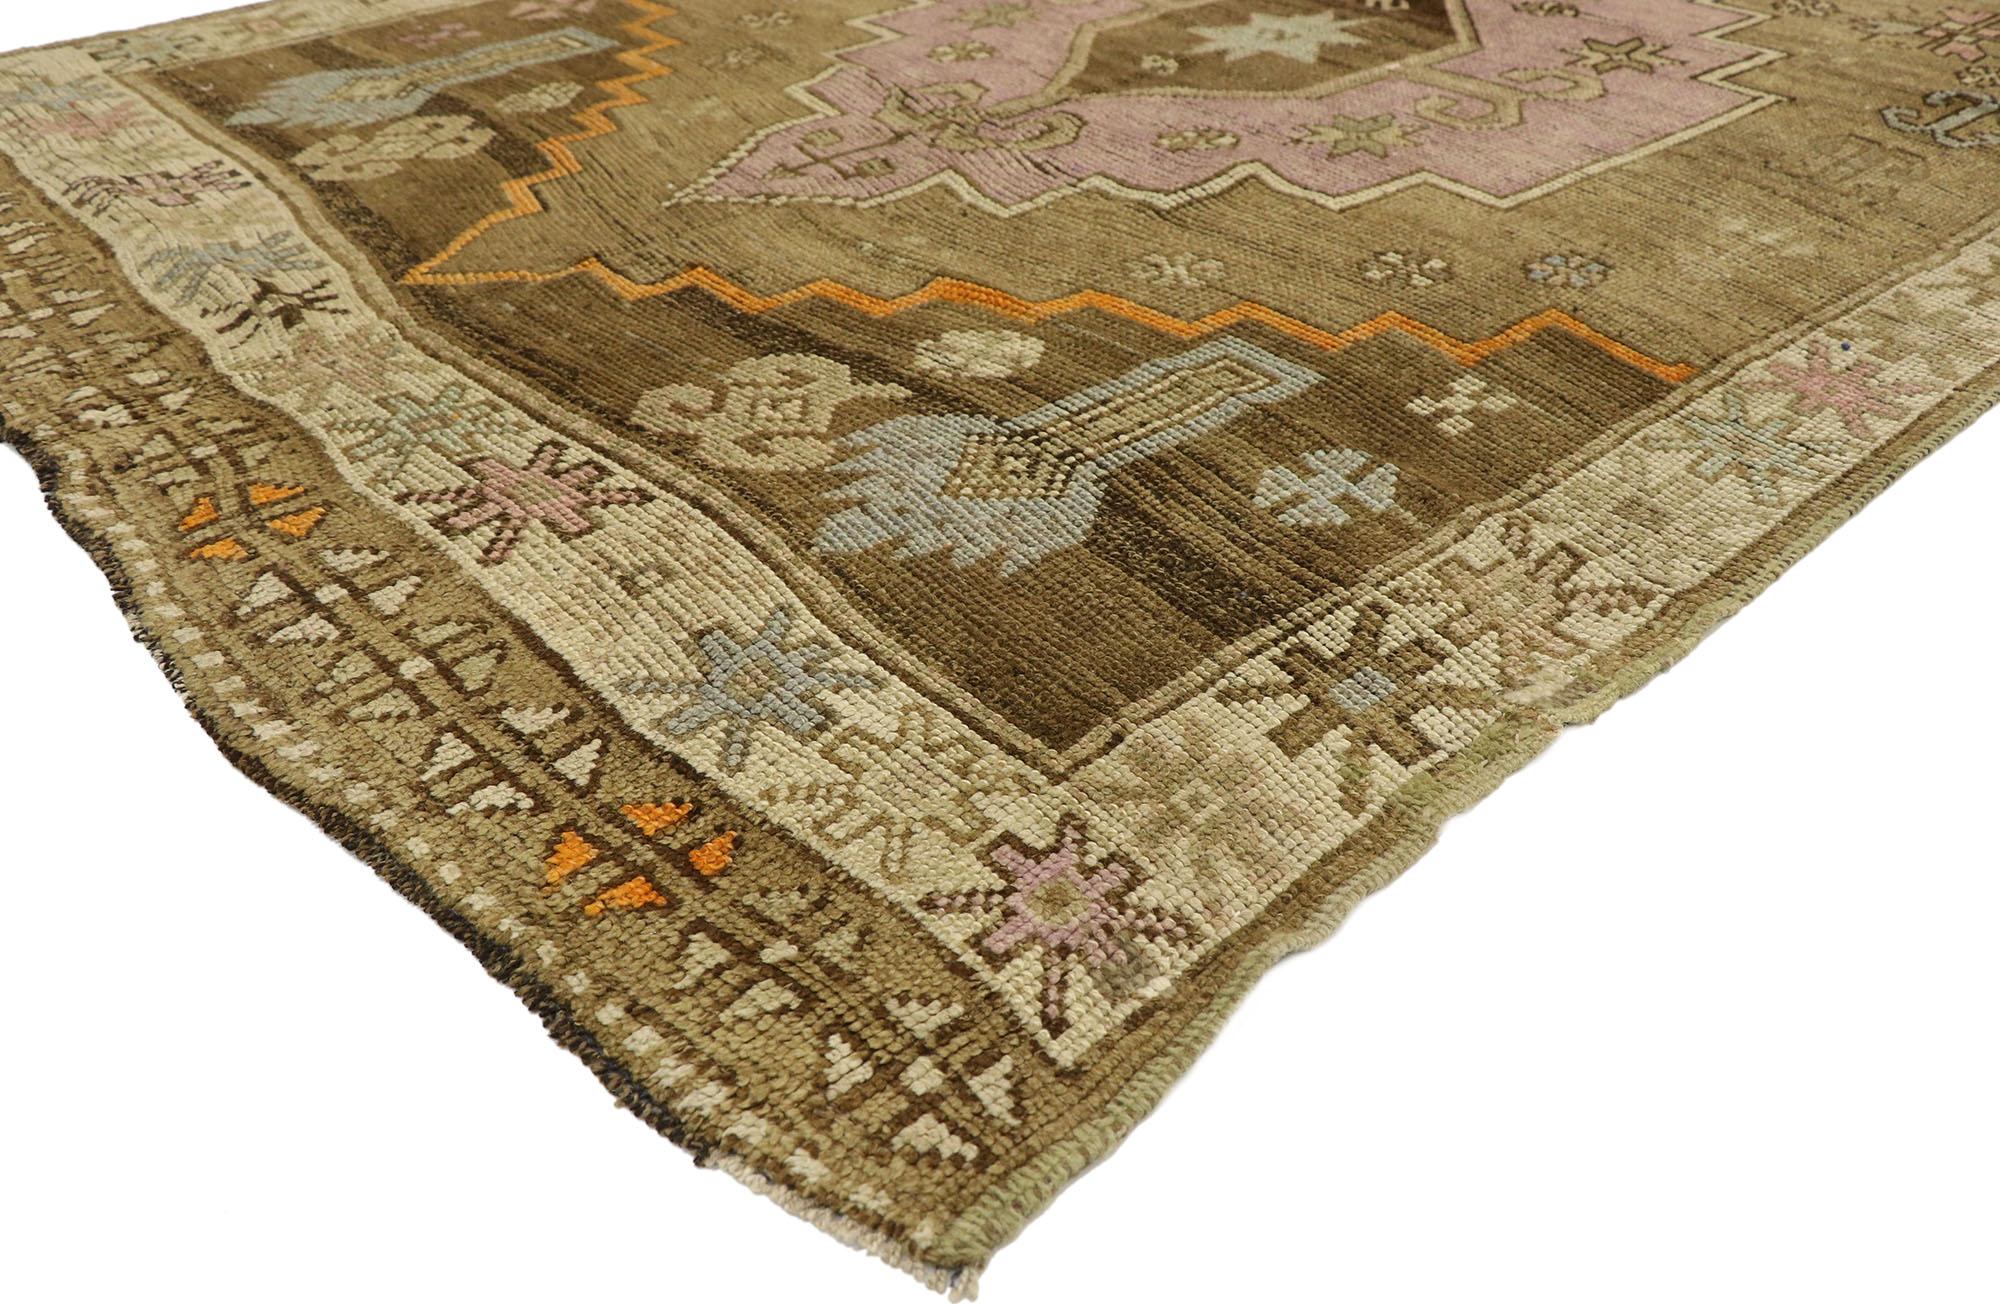 51848, vintage Turkish Oushak Kars Gallery rug with Modern Contemporary style 05'00 x 14'00. This hand-knotted wool vintage Turkish Oushak Kars gallery rug with Modern Contemporary style manages to maintain its true midcentury credentials without